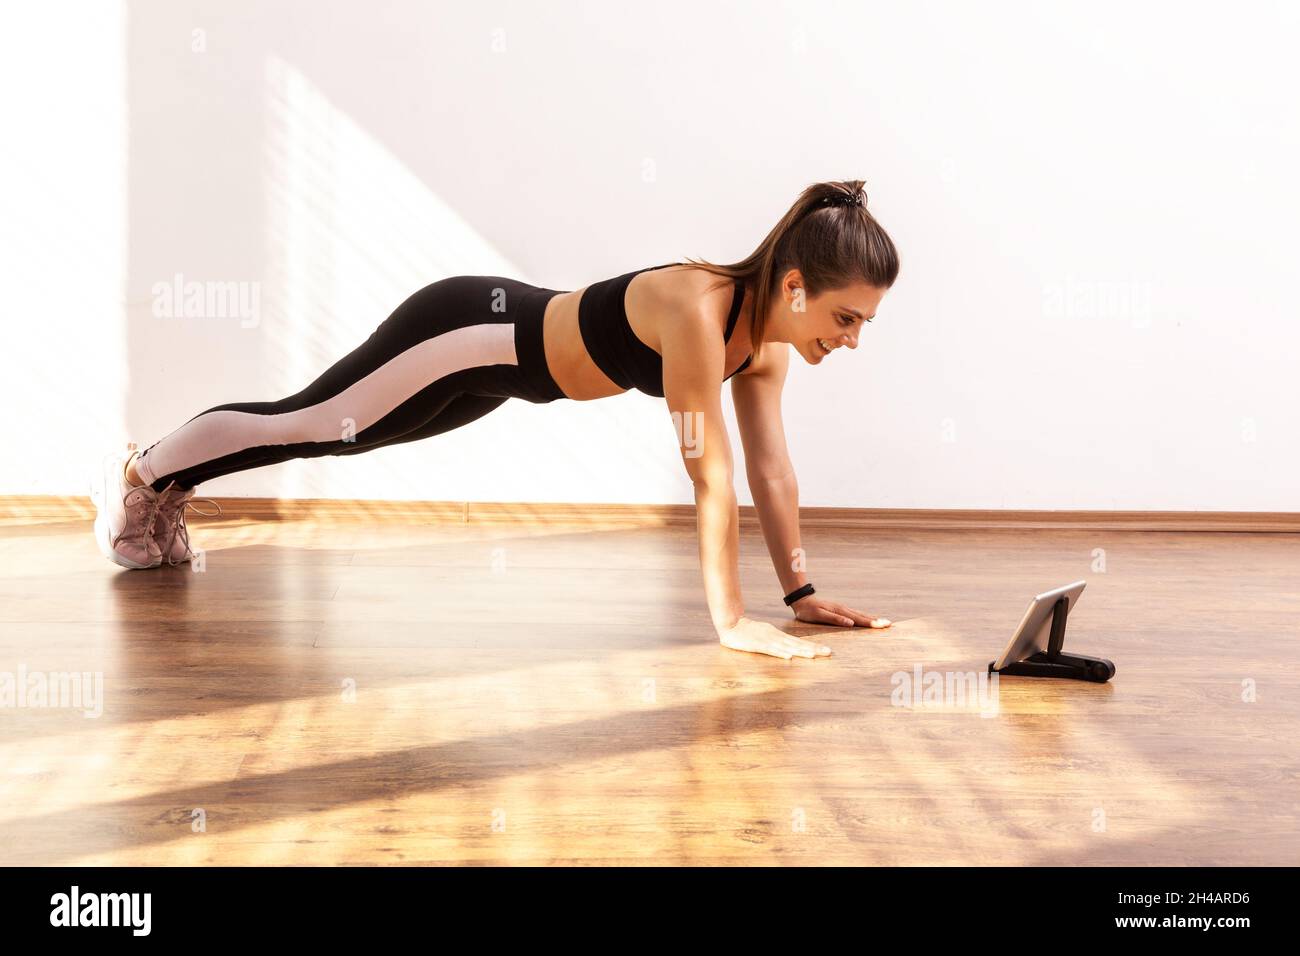 Woman doing plank exercises while watching video on tablet, learning online, repeat after coach, wearing black sports top and tights. Full length studio shot illuminated by sunlight from window. Stock Photo